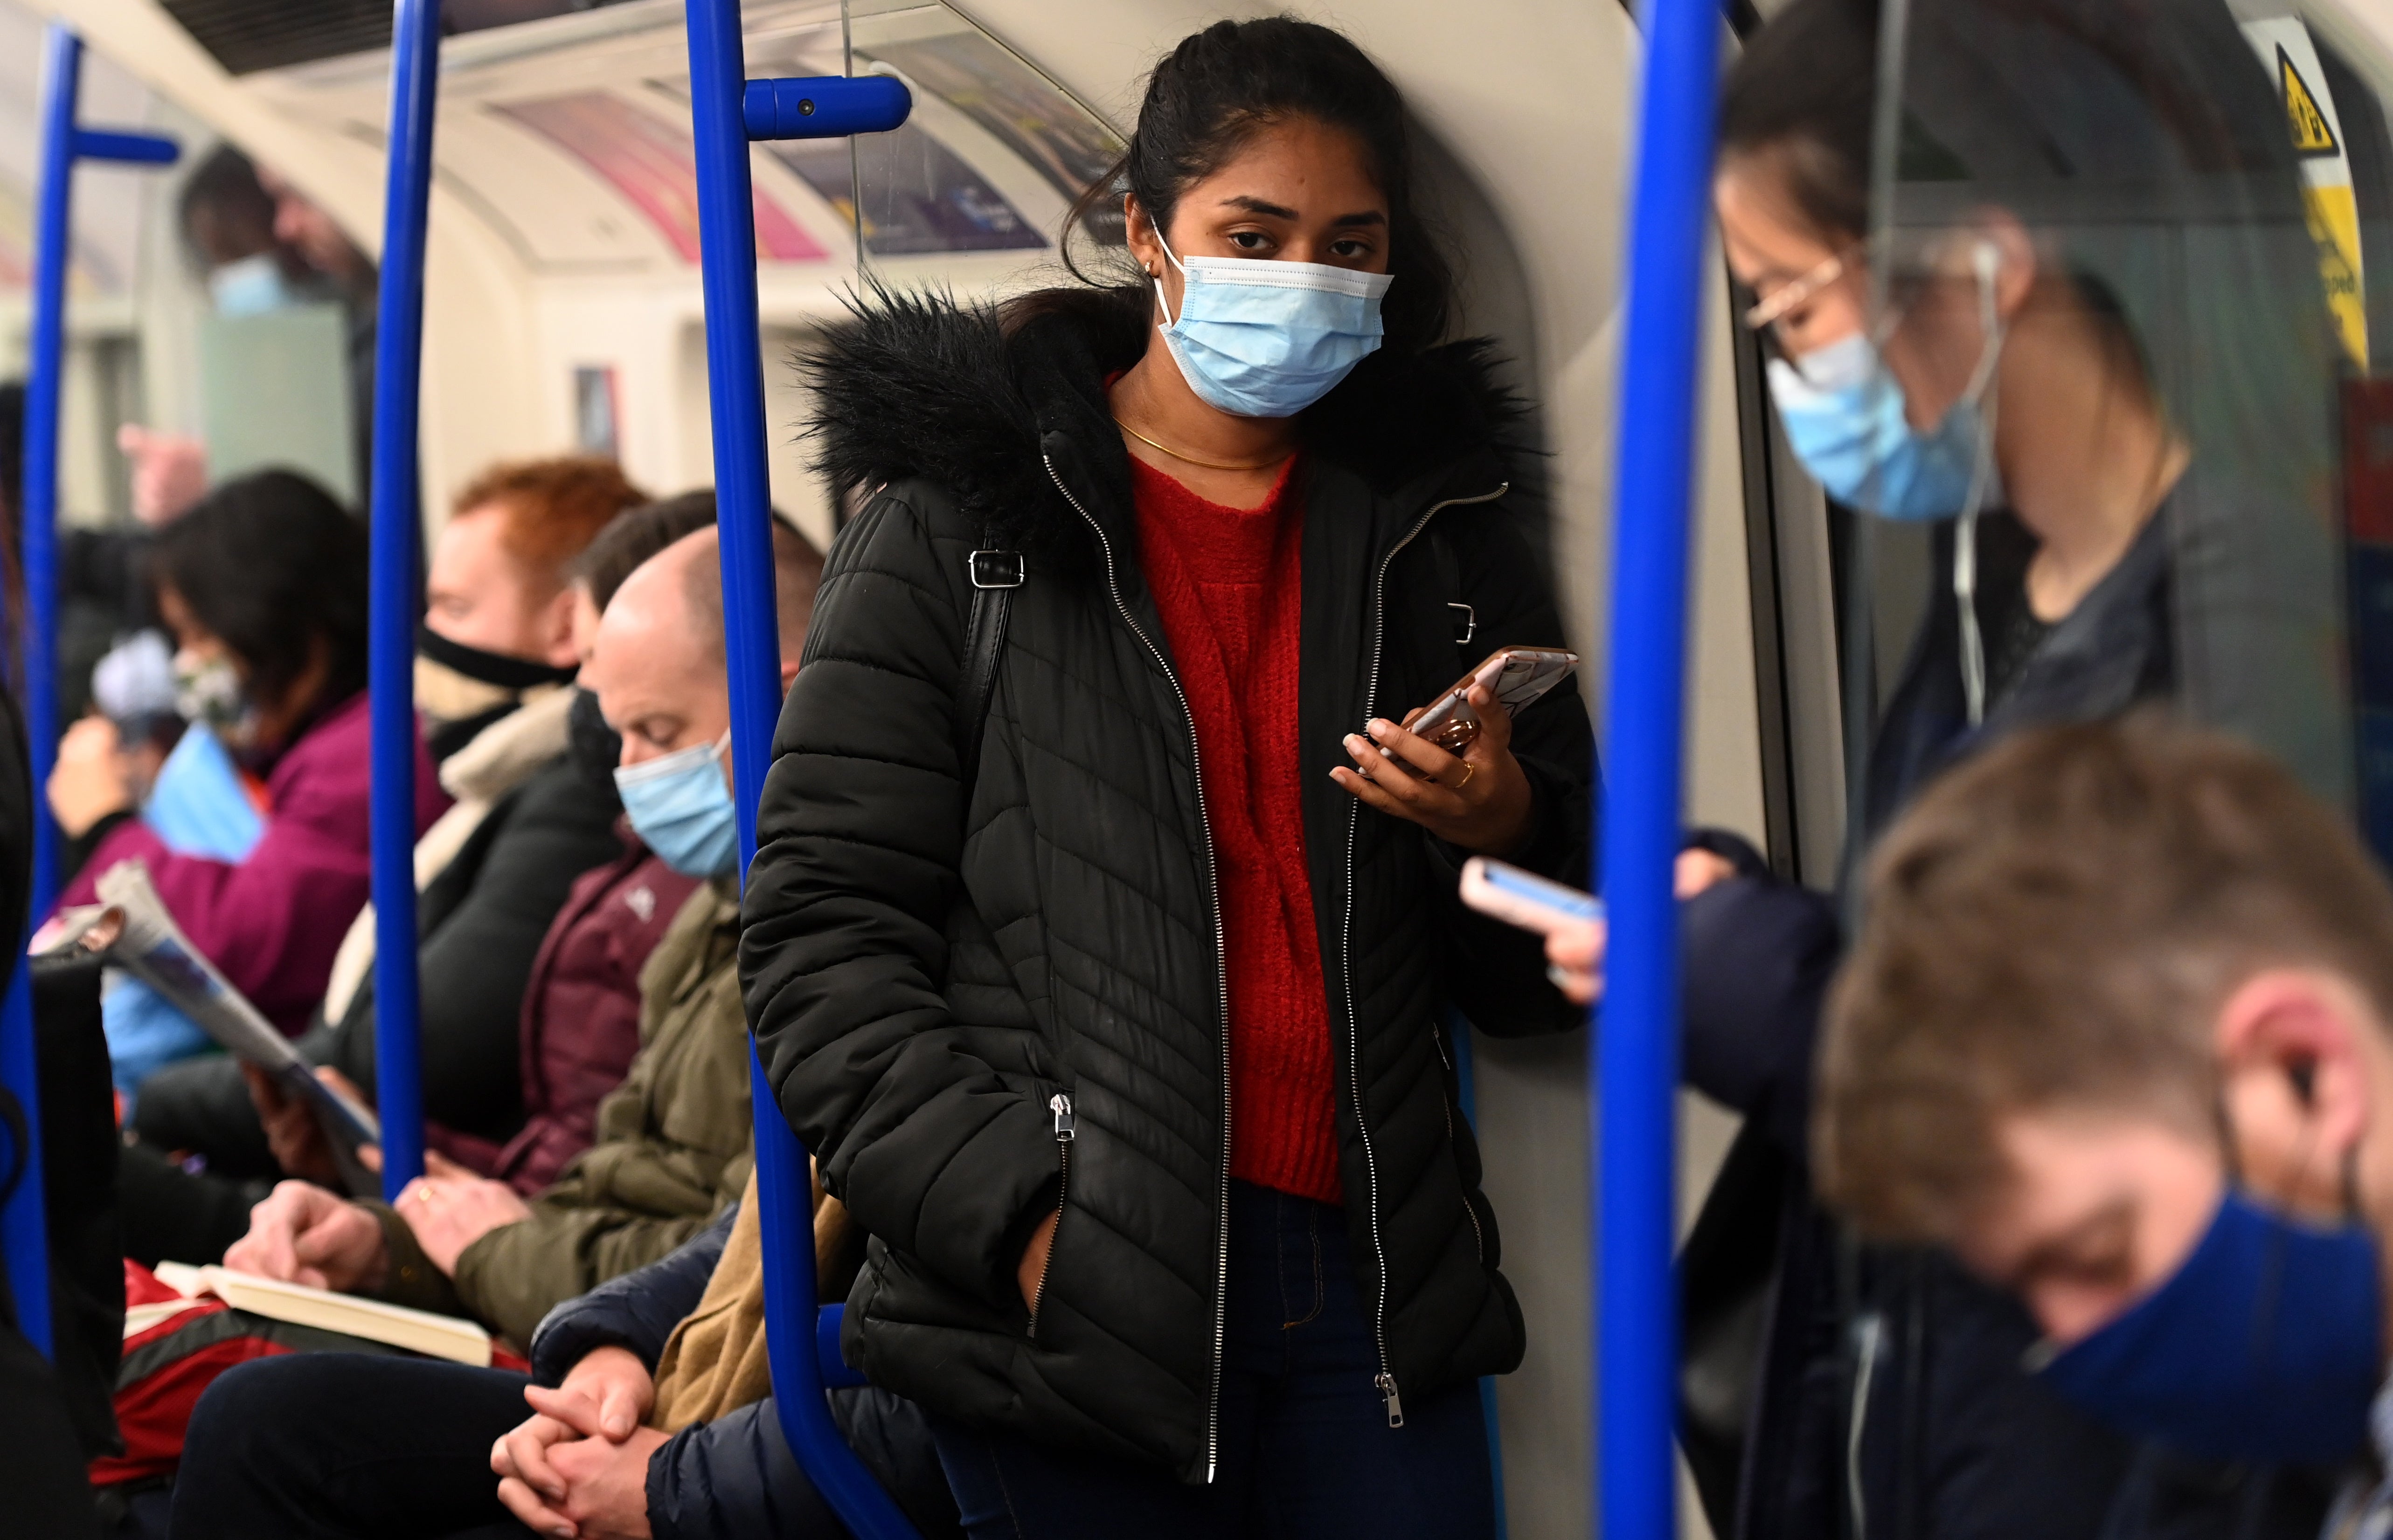 Mask wearing will once again be mandatory on public transport and in shops in England